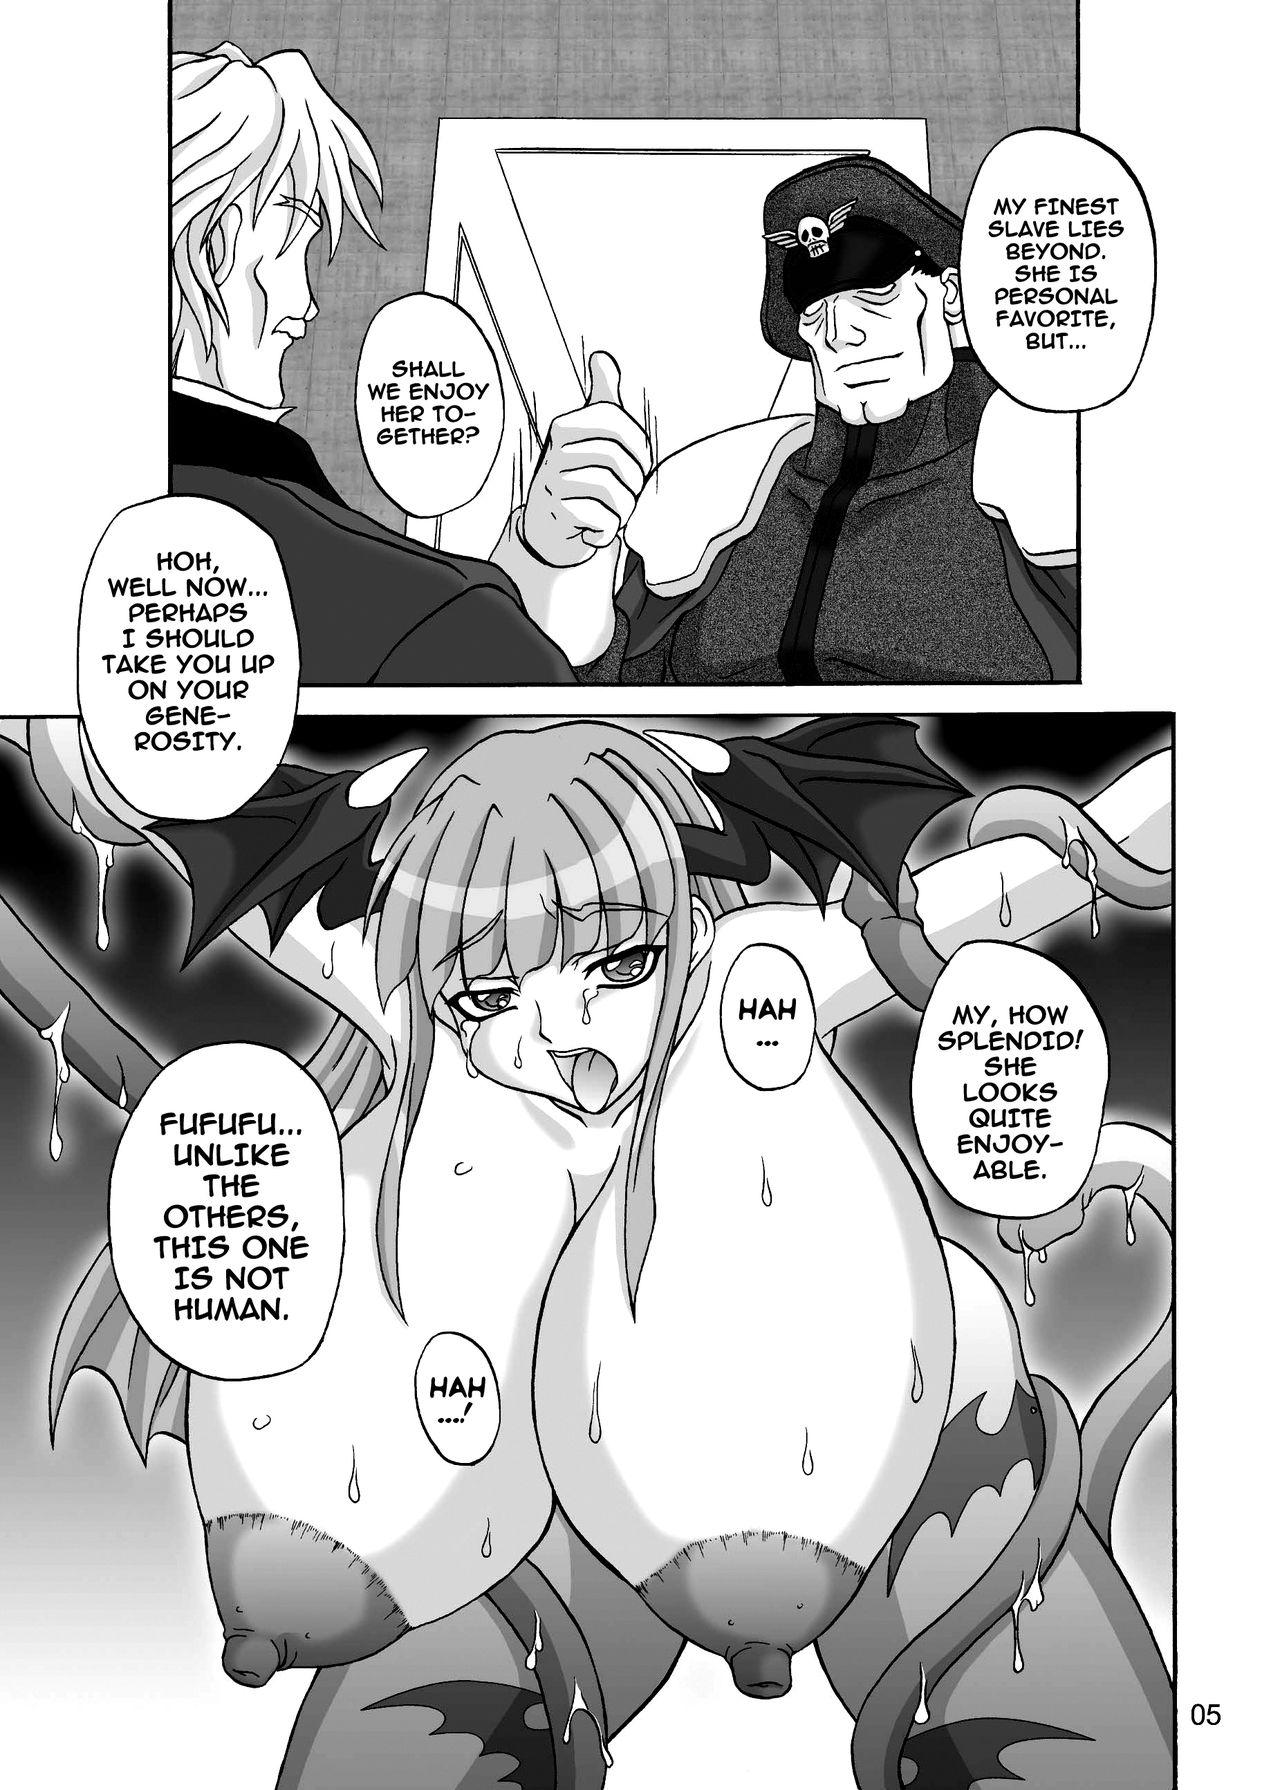 Free Blowjobs Insanity 2 - King of fighters Darkstalkers Free Fuck - Page 4